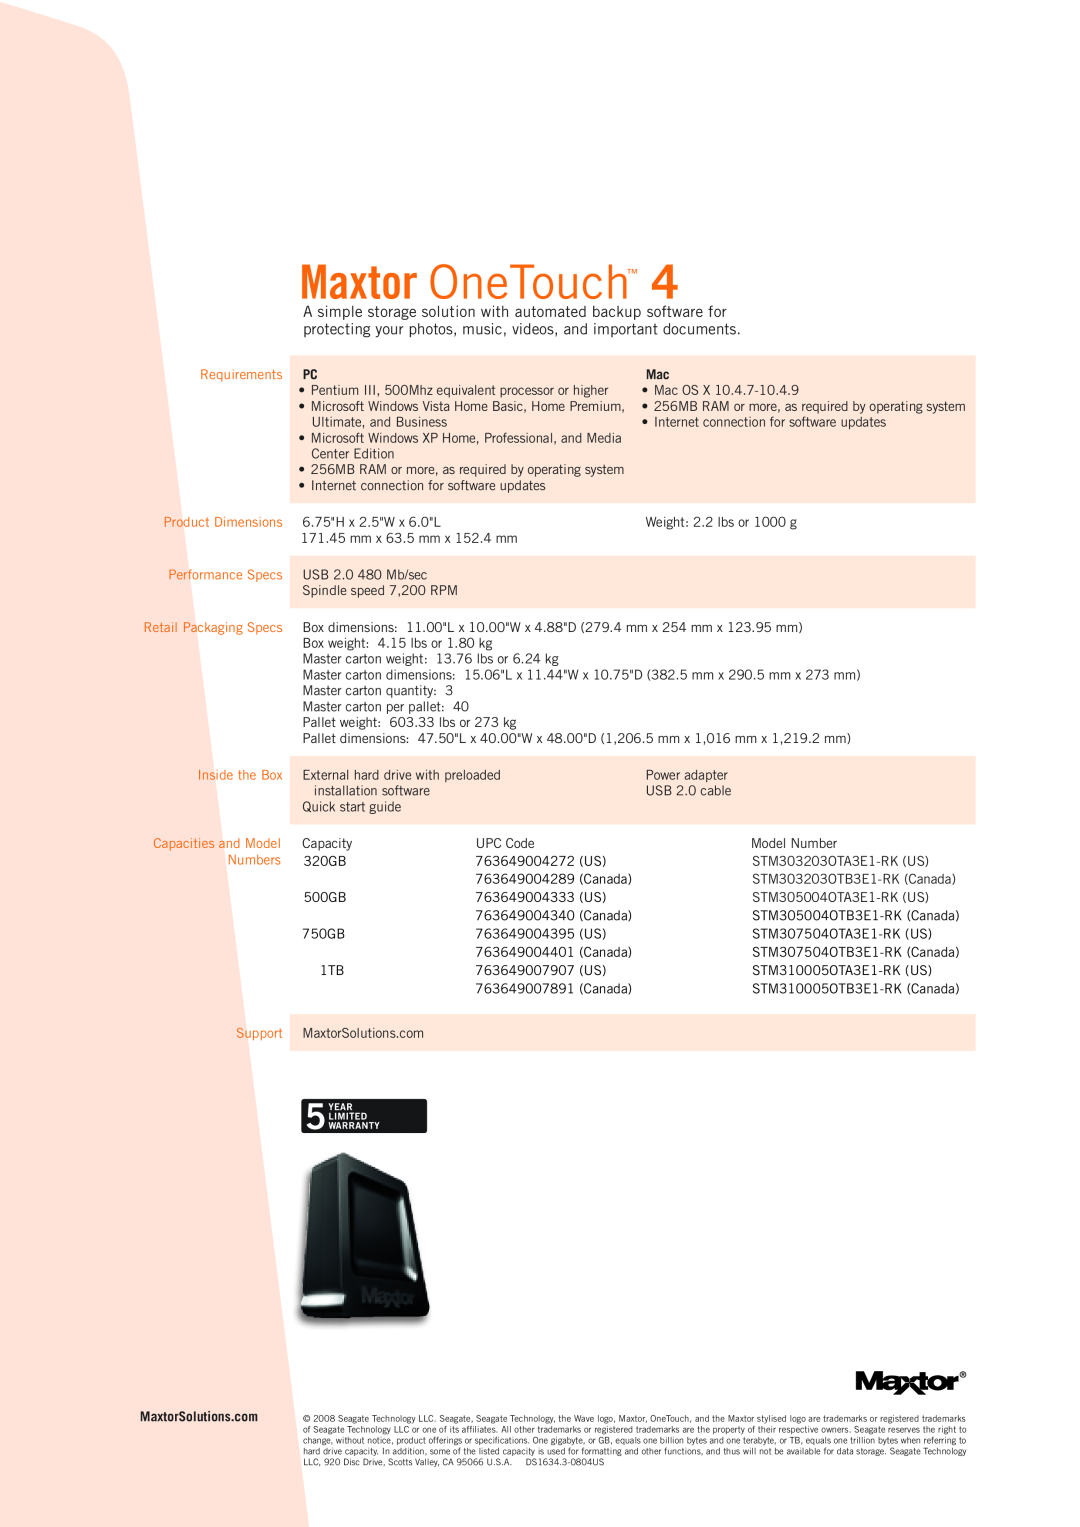 Maxtor STM310005OTA3E1-RK Maxtor OneTouch, Requirements, Product Dimensions, Performance Specs, Inside the Box, Numbers 